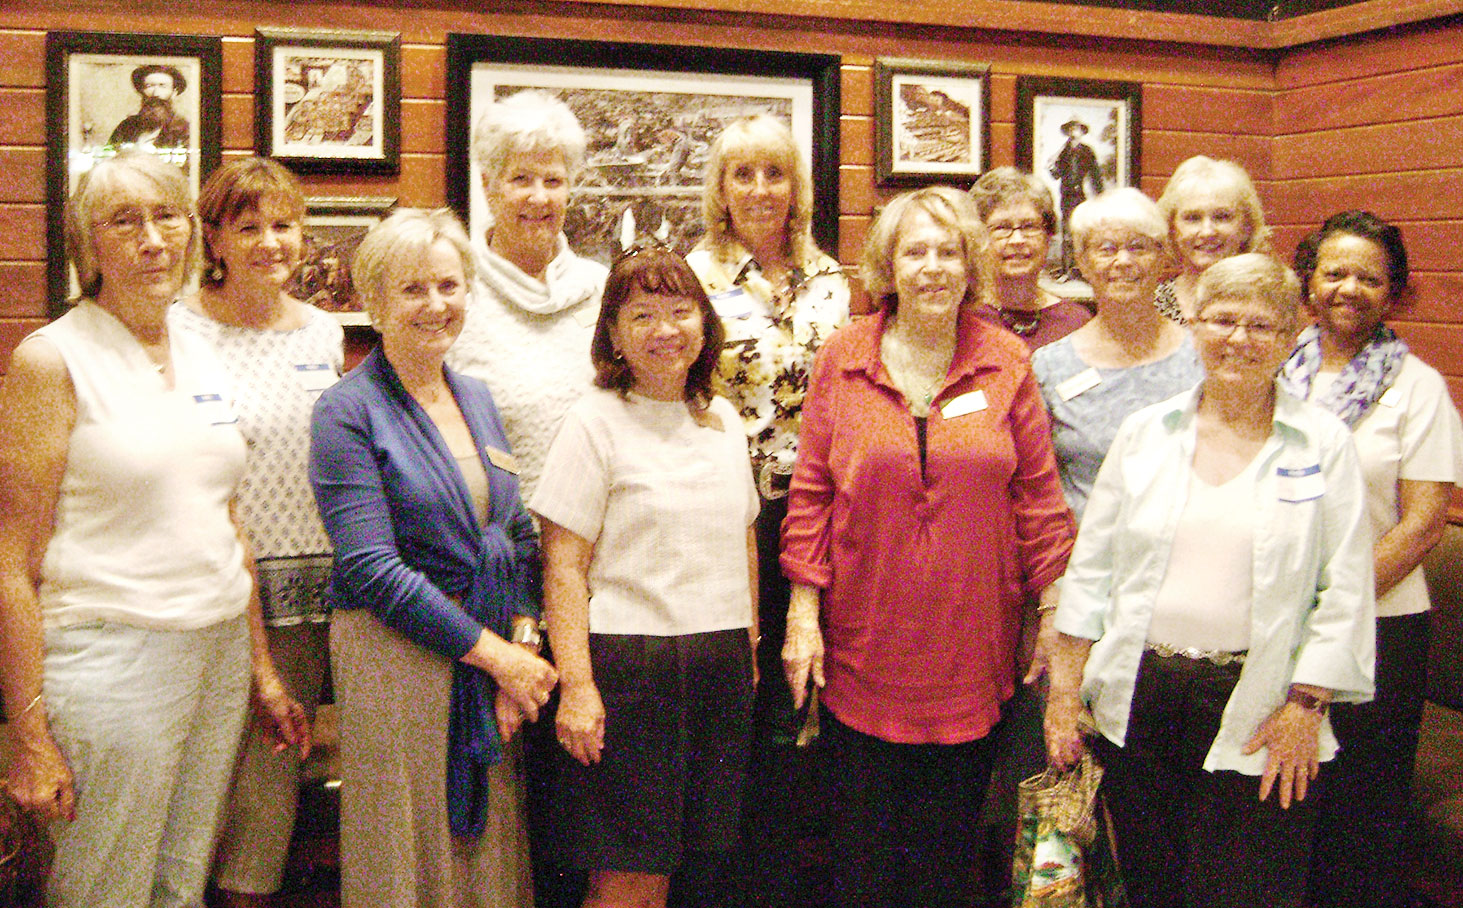 The ladies who lunch at Claim Jumper in March.